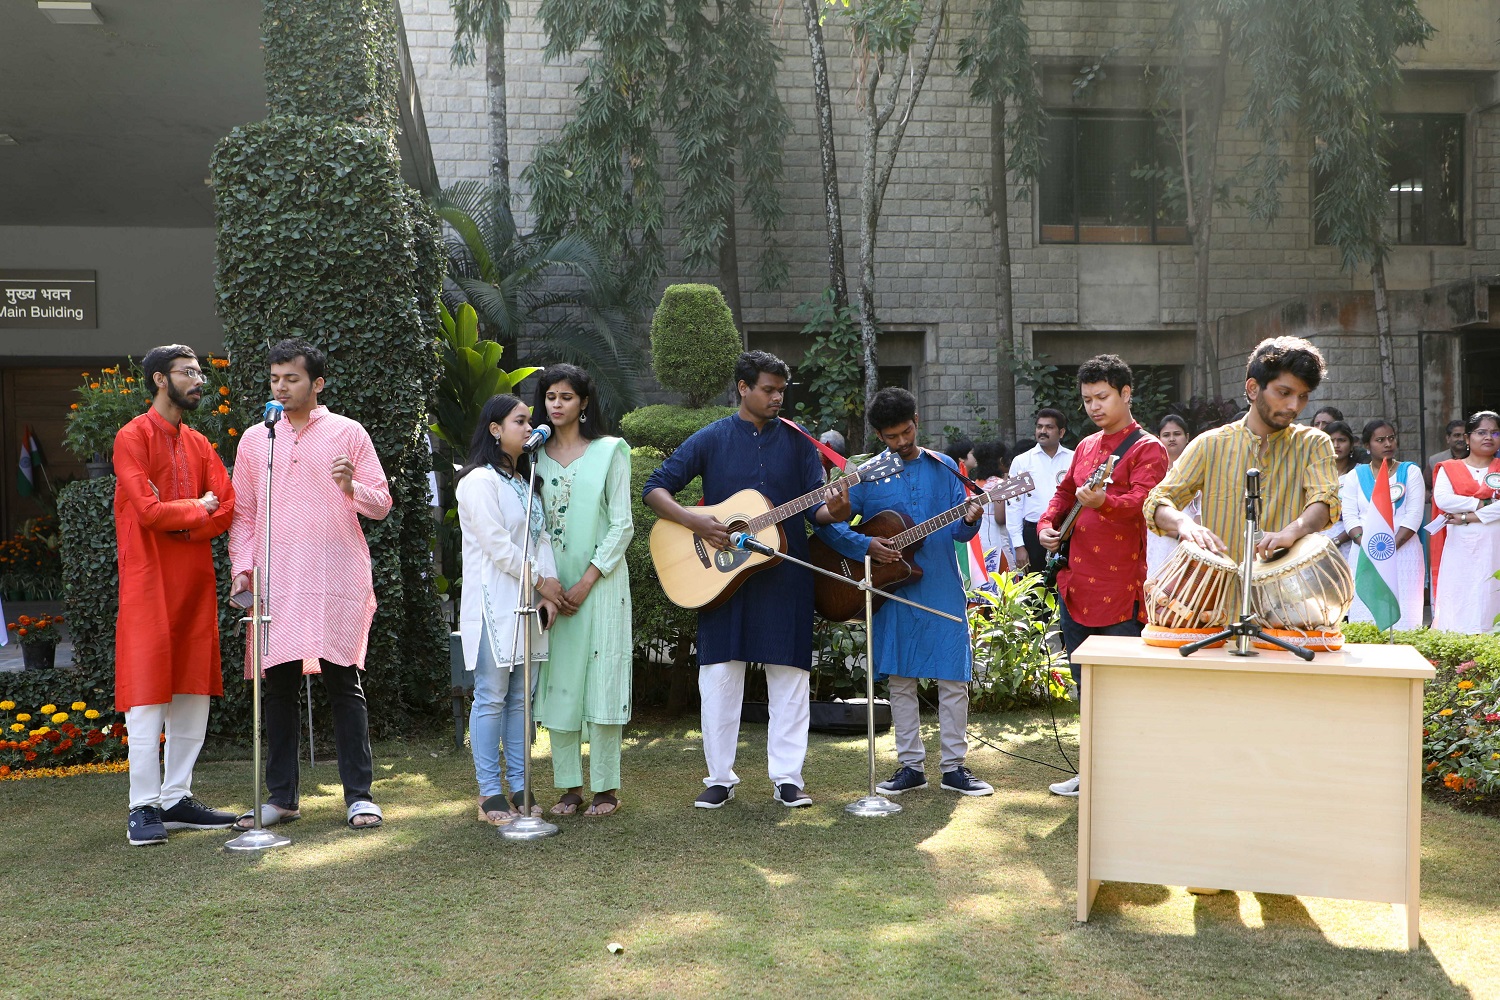 Students of IIMB sing patriotic songs on the Republic Day celebration.